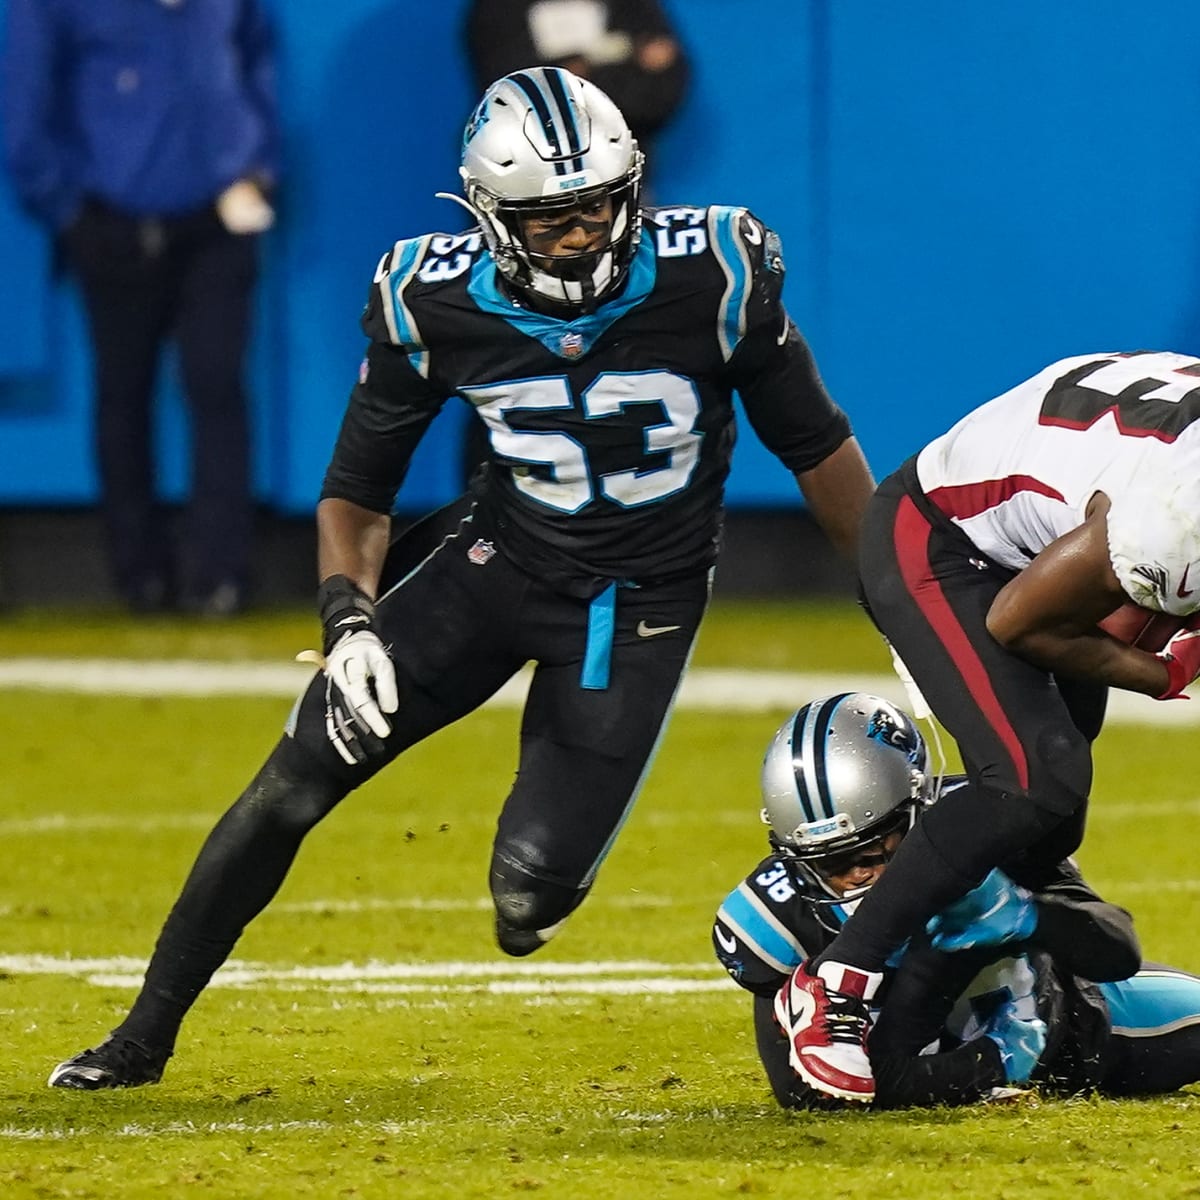 Panthers Brian Burns is NFC Defensive Player of the Week